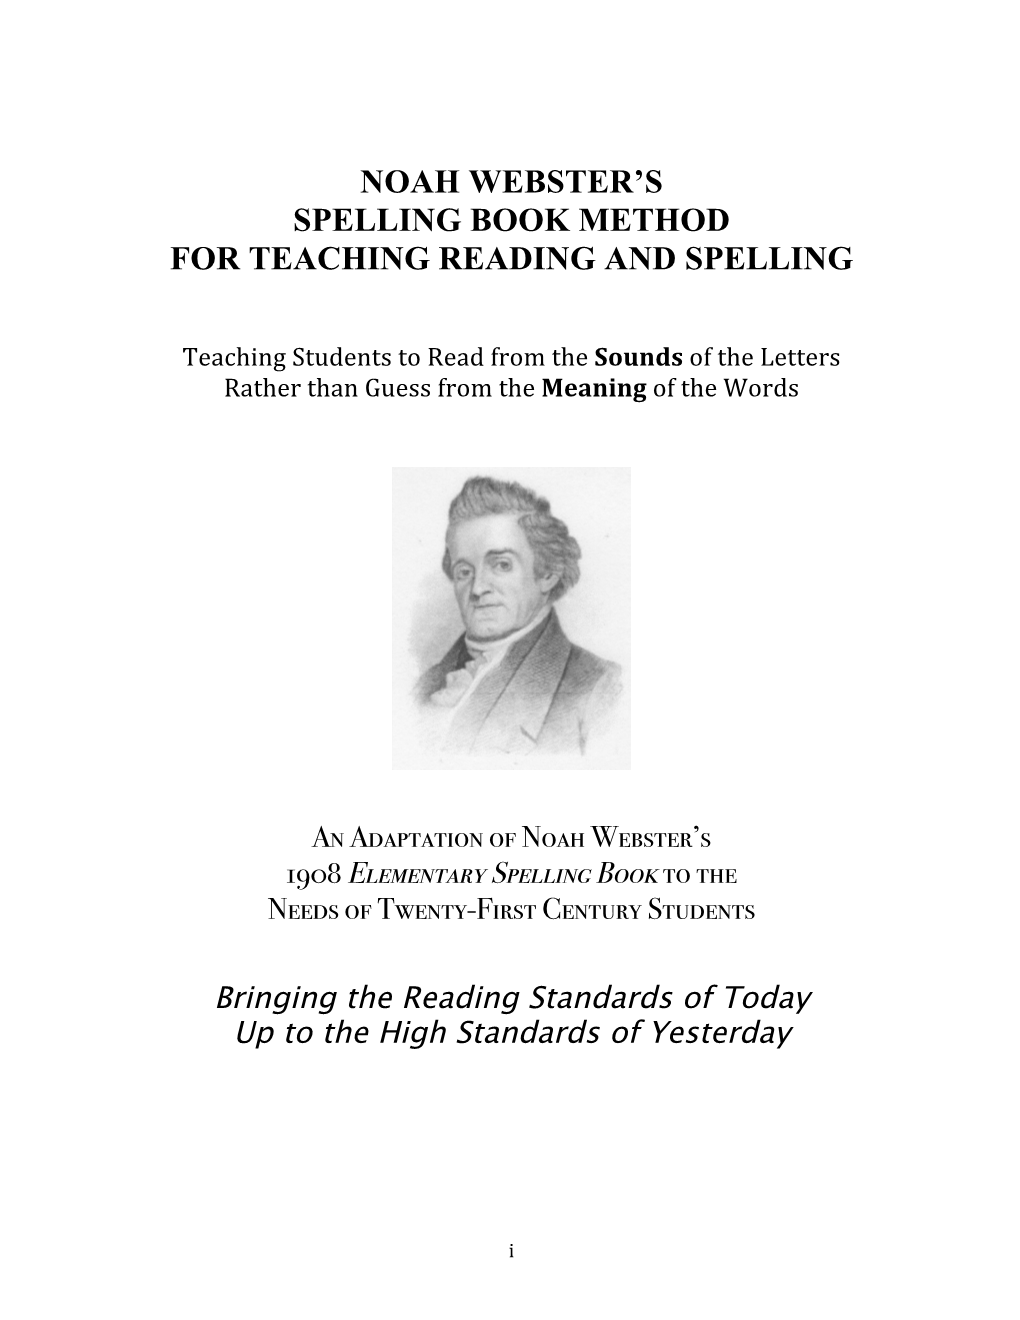 Noah Webster's Spelling Book Method for Teaching Reading and Spelling